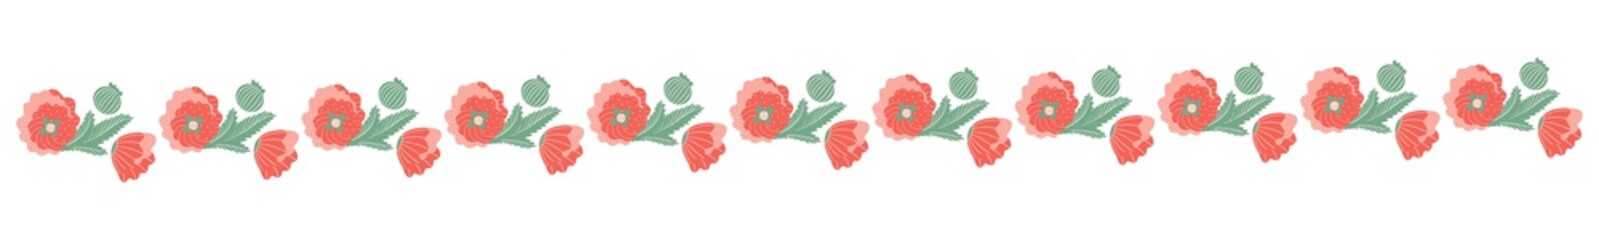 Decorative strip of poppies. Open and closed buds without stems on a white background. Vector.